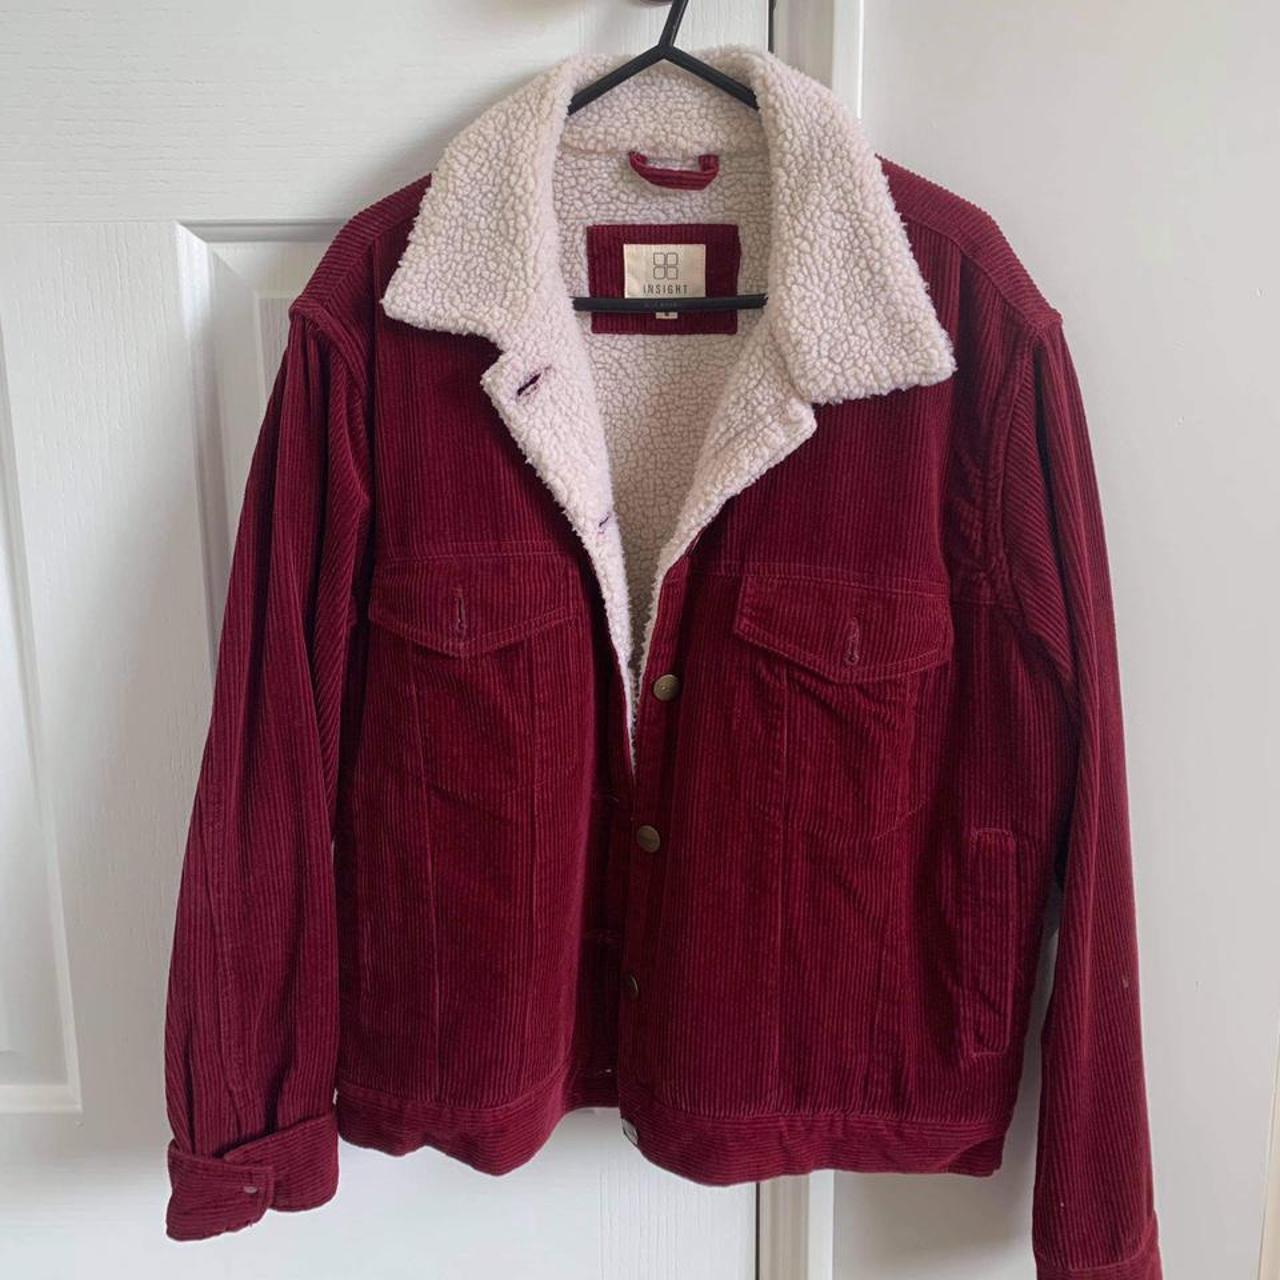 INSIGHT WINE RED CORD JACKET bought from general... - Depop